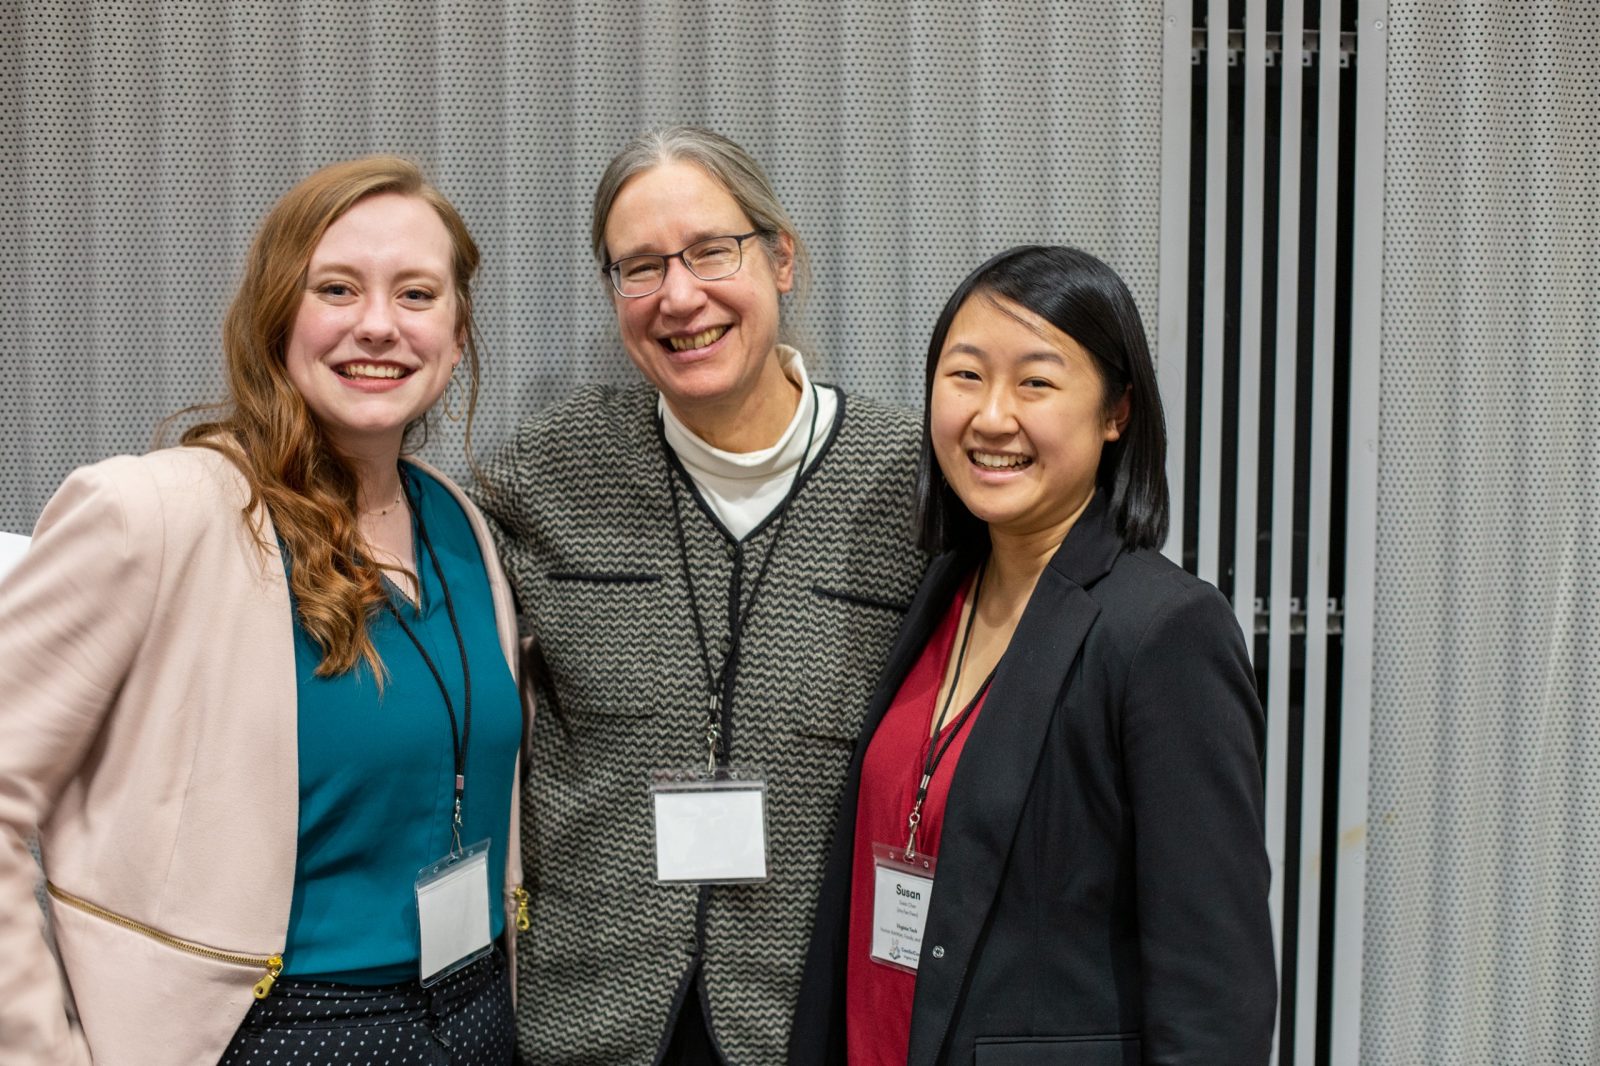 Stephanie Edwards Compton (left) and Susan Chen (right) were the co-chairs of the ComSciCon organizing committee. Carrie Kroehler (center), associate director for the Center for Communicating Science, attended and participated in many workshops. Photo courtesy of Alex Freeze.